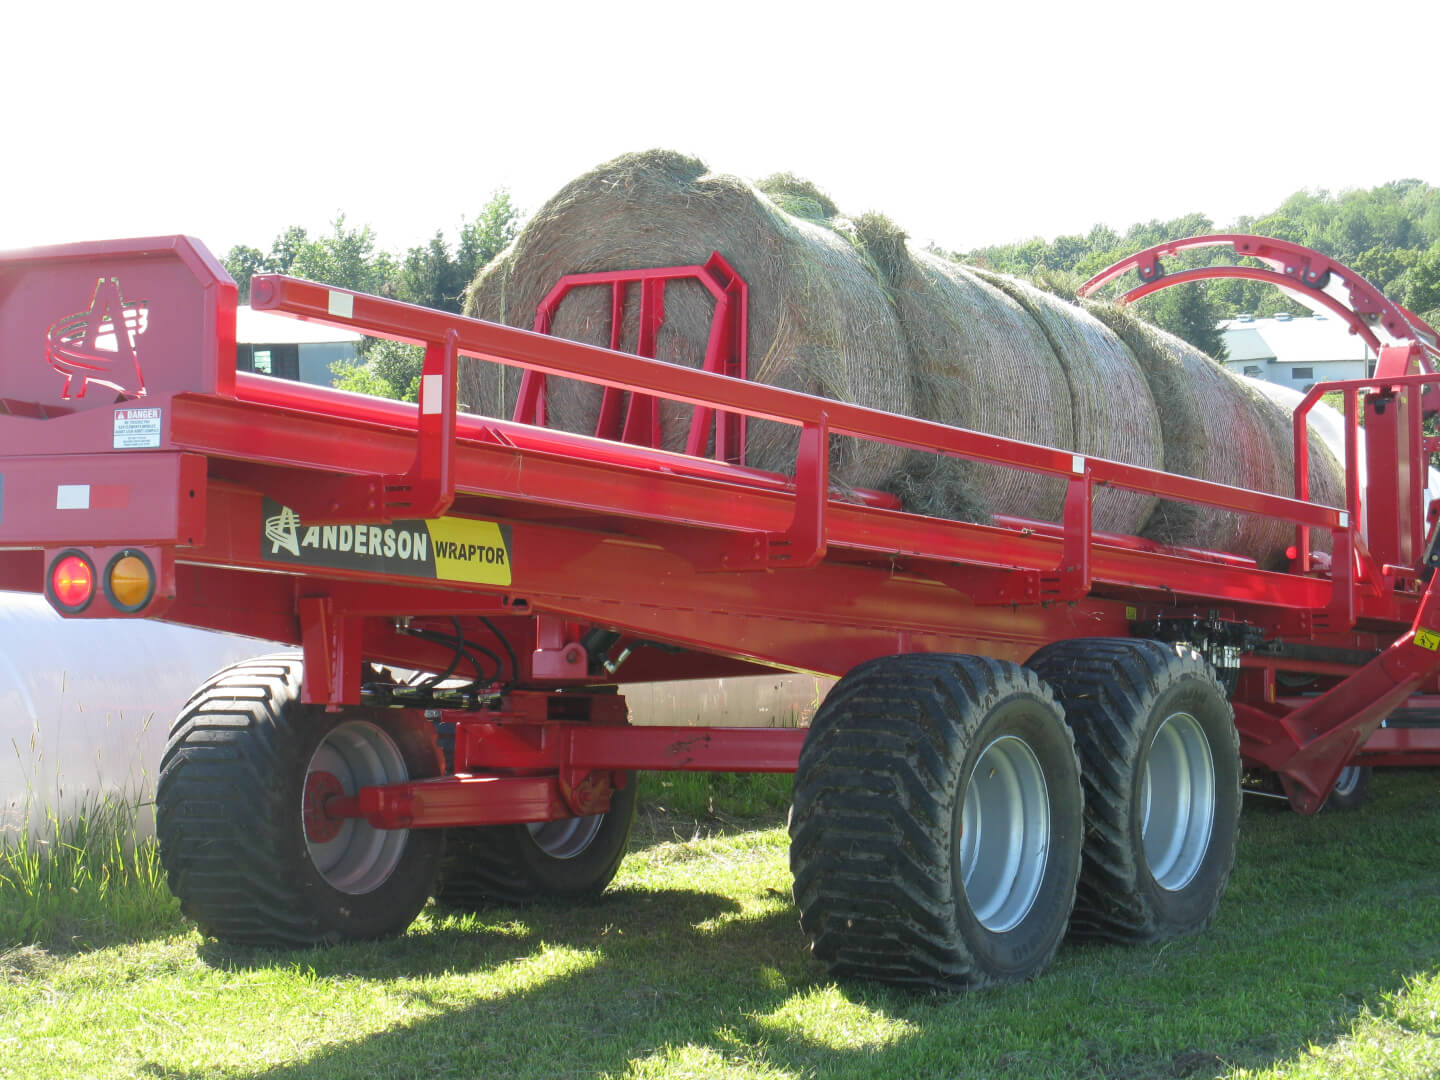 ANDERSON WRAPTOR COMBO "WRAPPER AND TRAILER" for Tractor